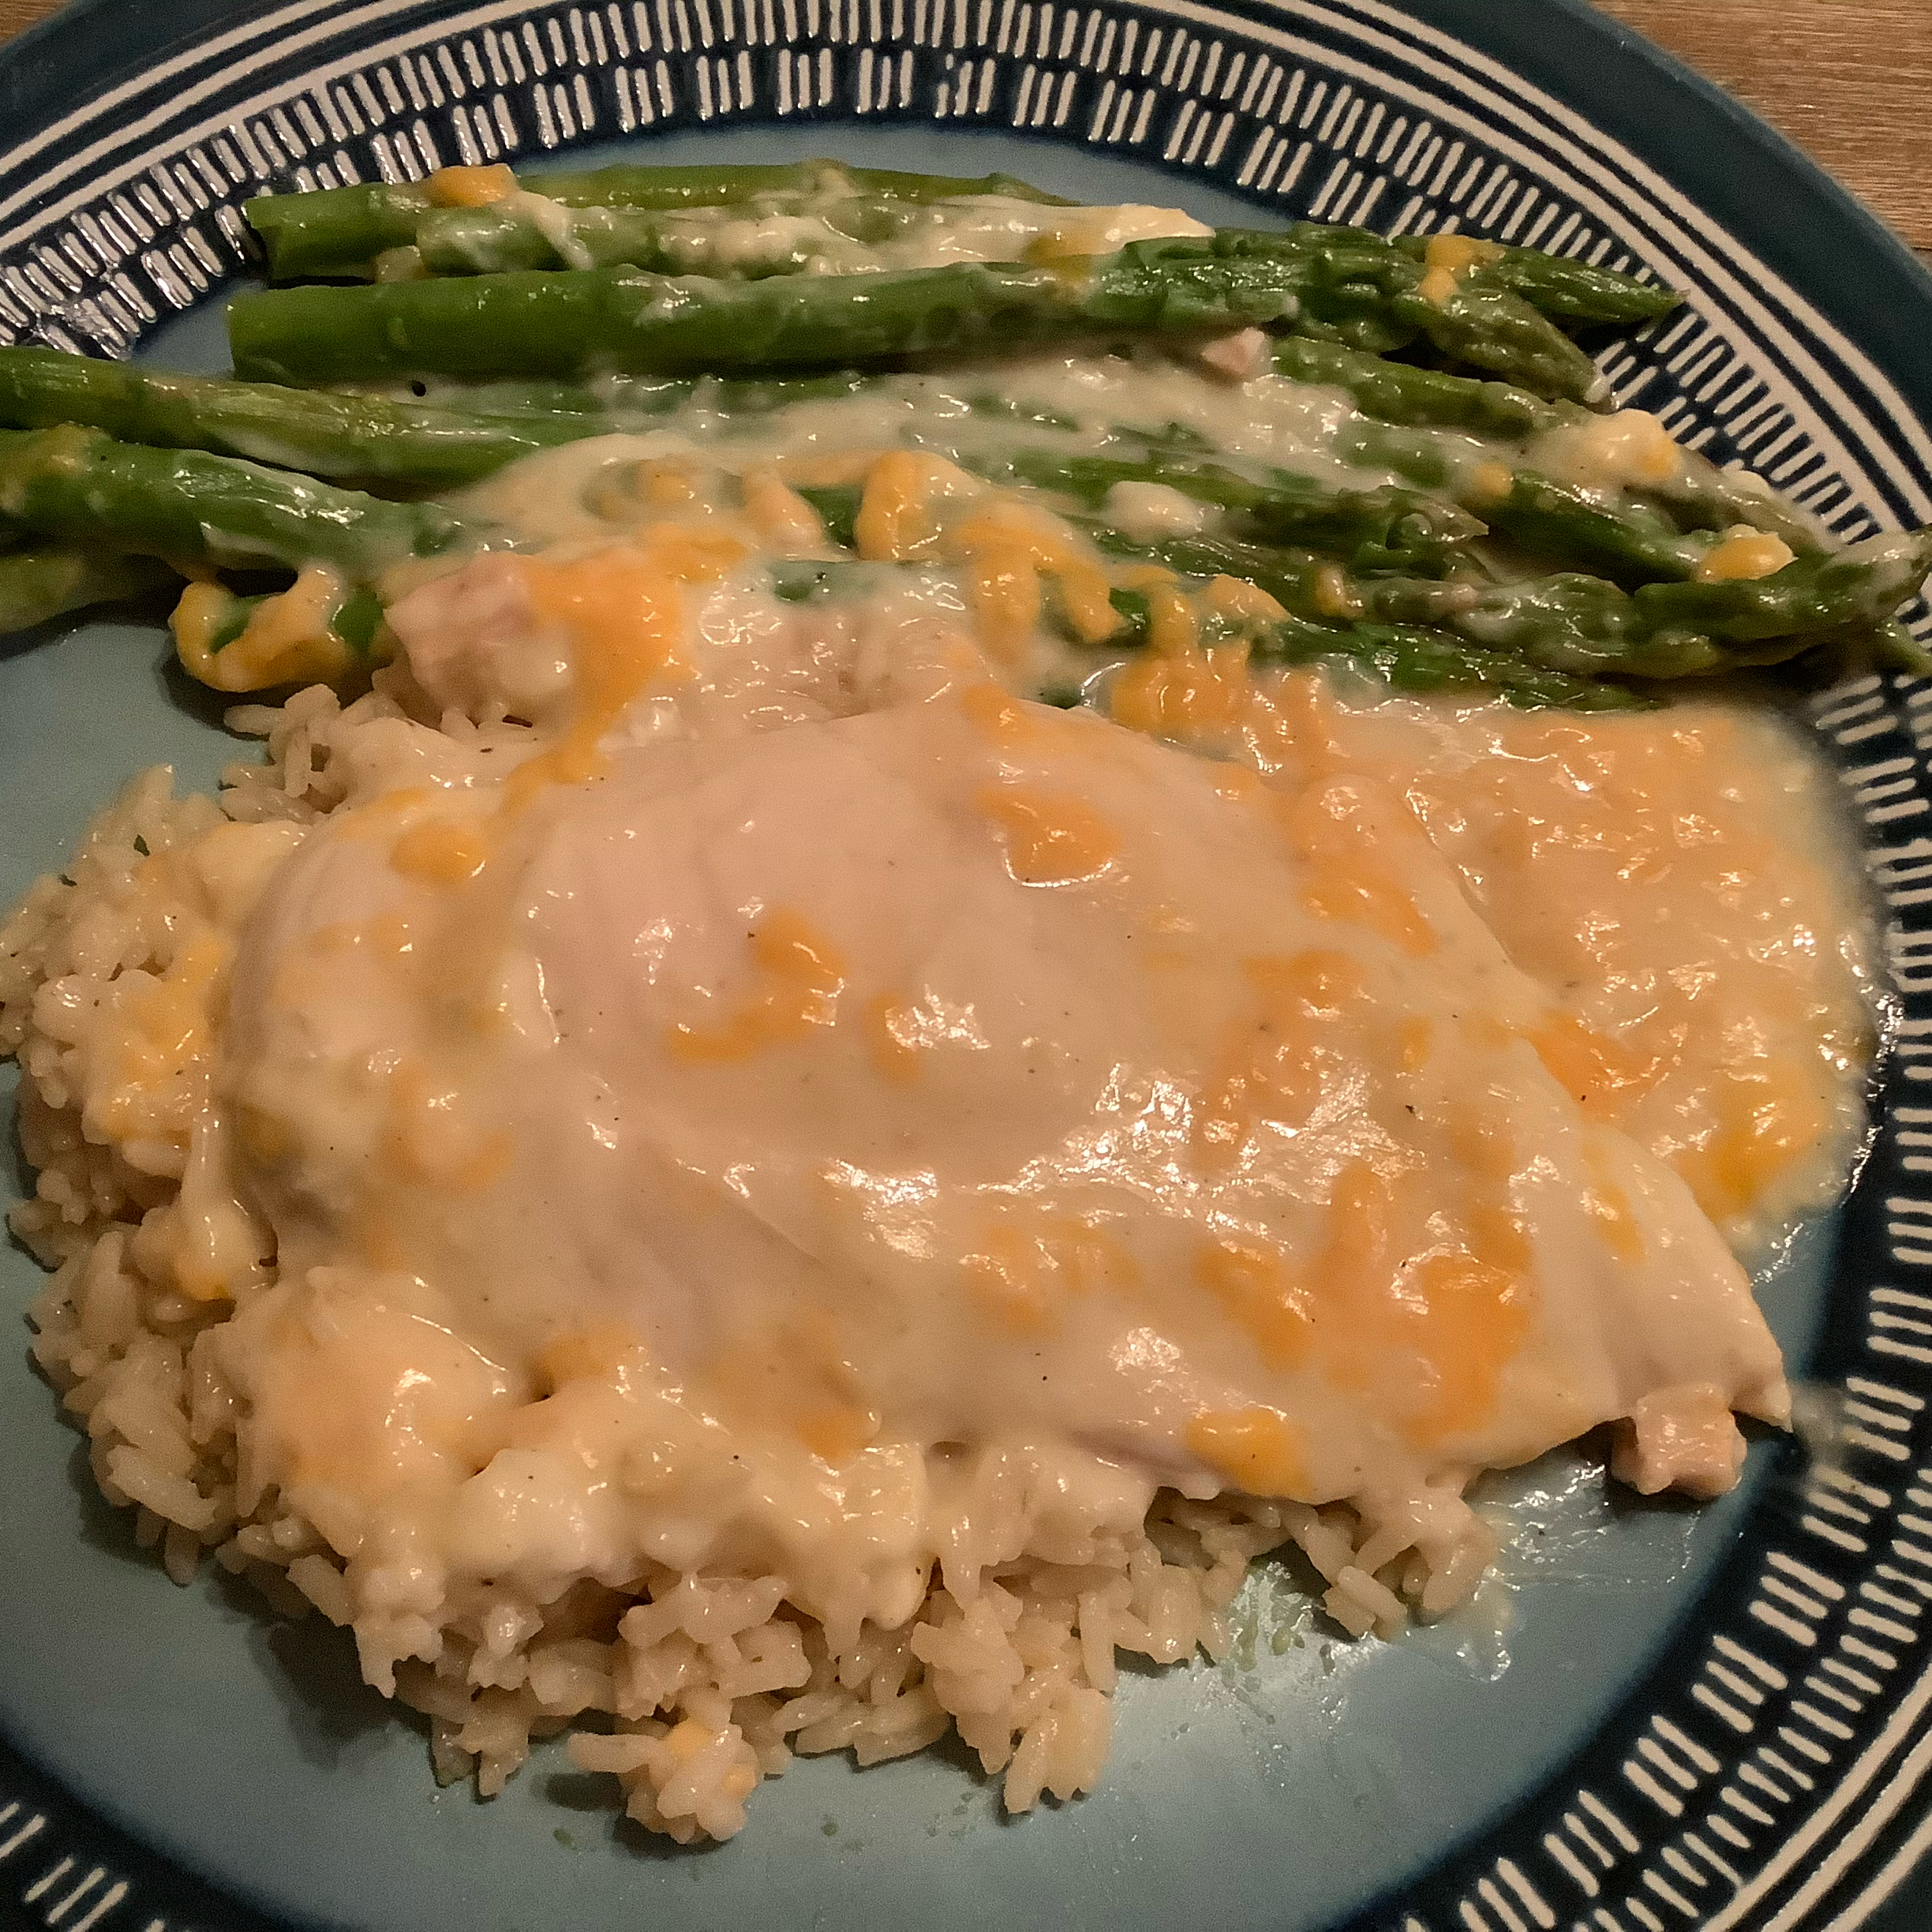 Saucy Chicken and Asparagus Bake